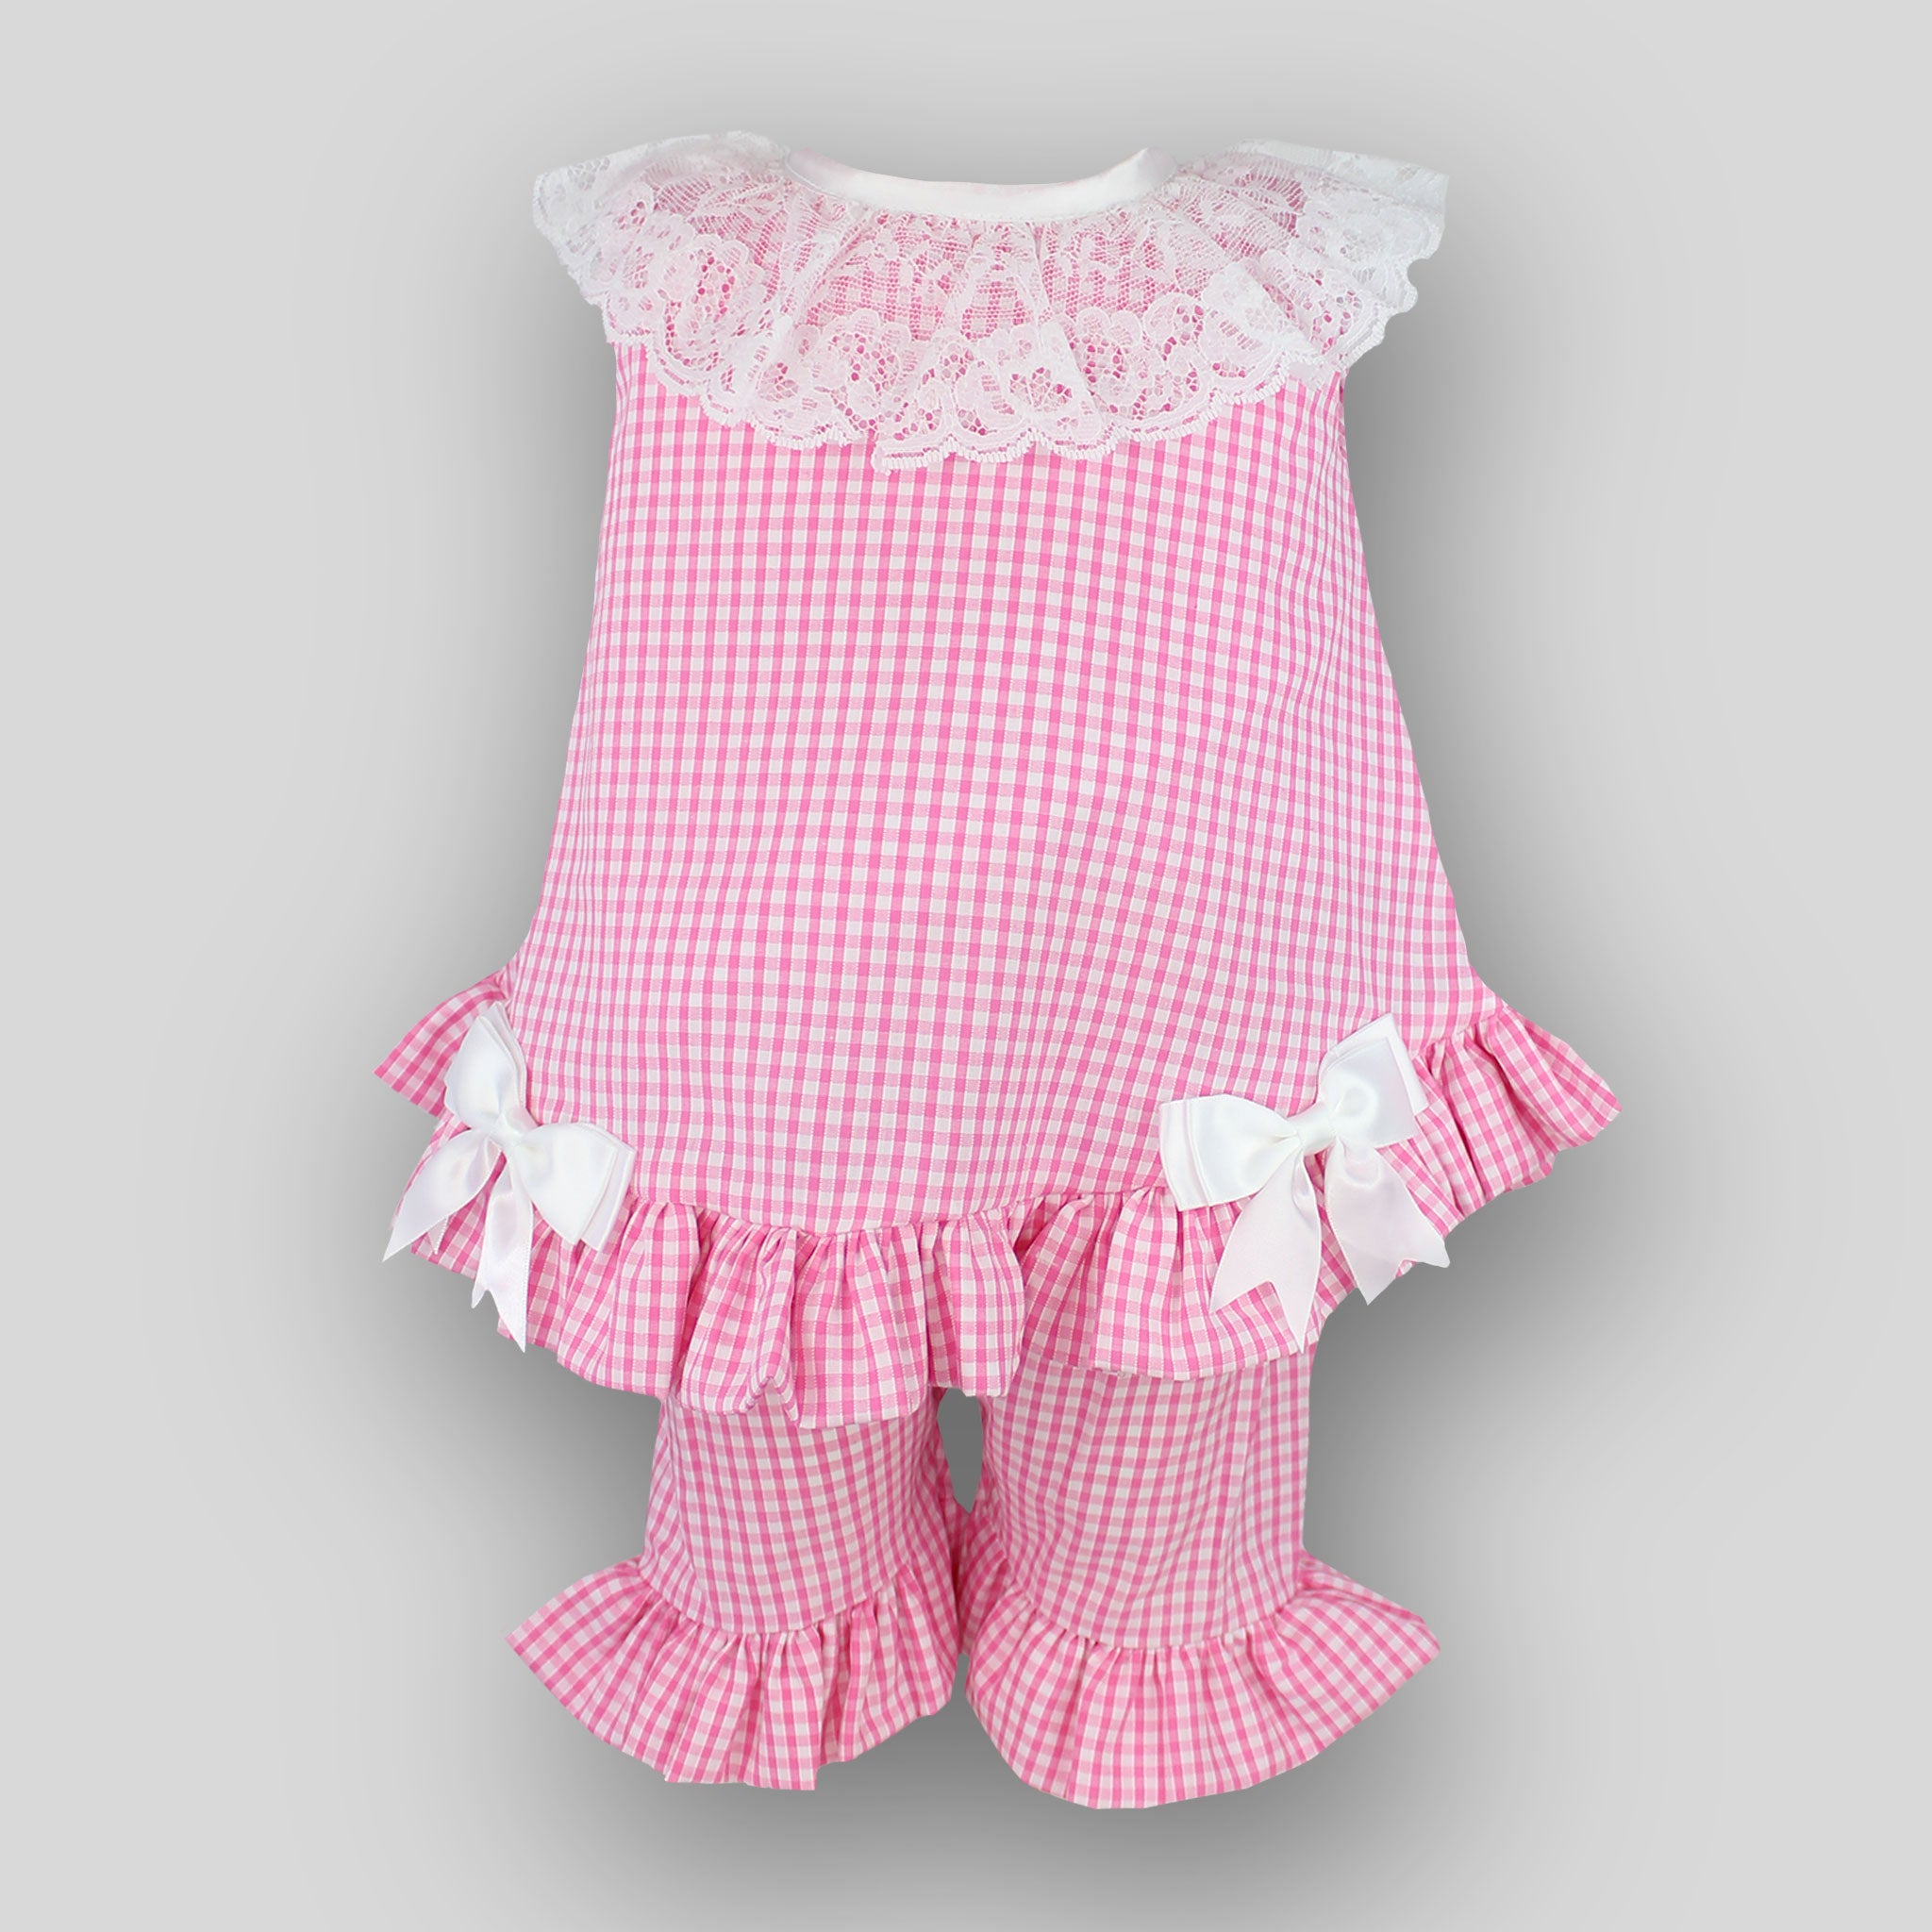 pink checked baby girls outfit